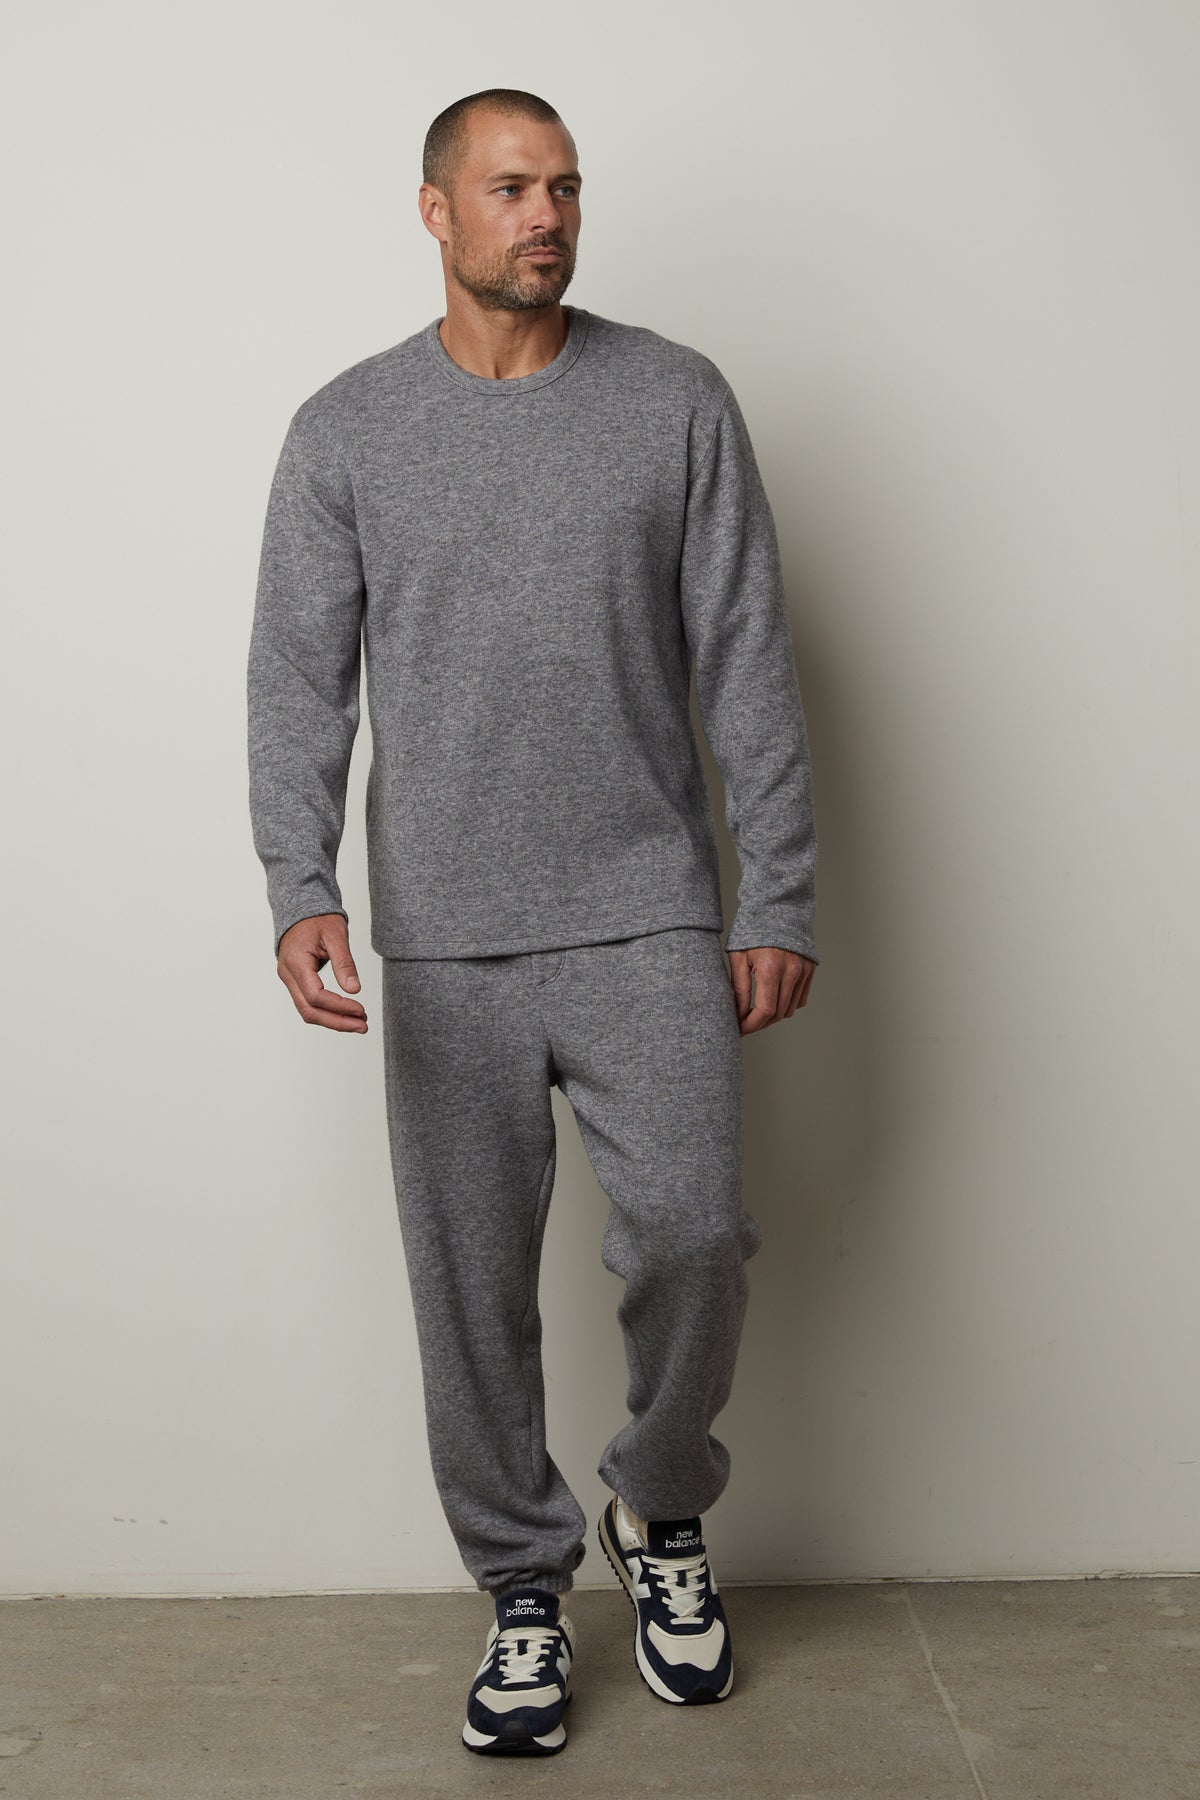   A man wearing SALINGER DOUBLE KNIT SWEATPANTS by Velvet by Graham & Spencer and sneakers. 